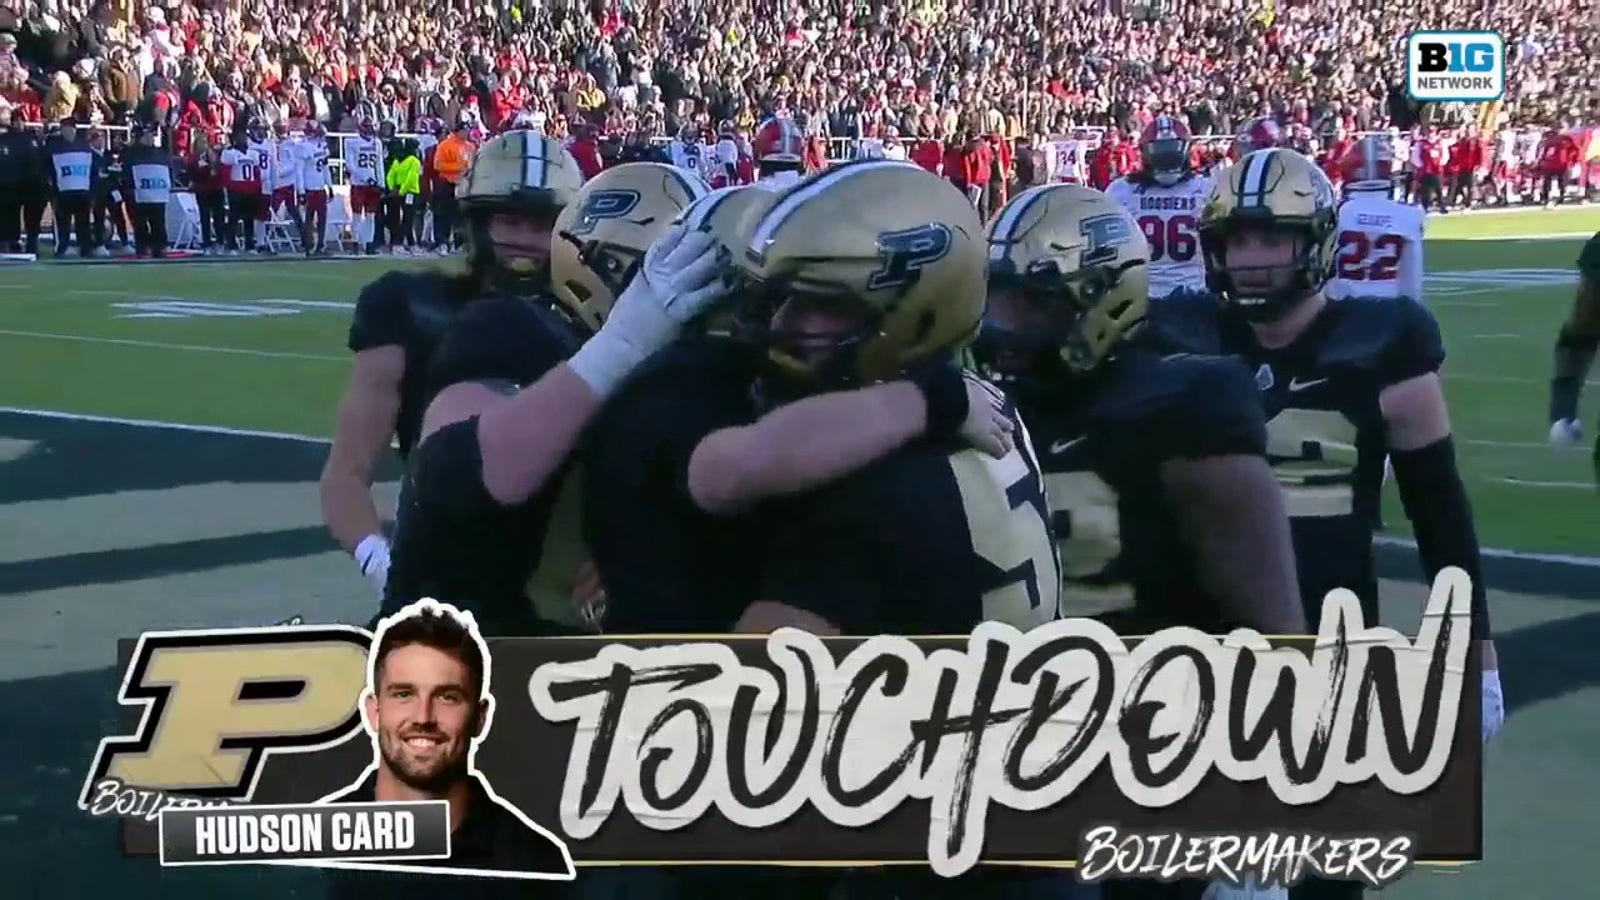 Hudson Card rushes 10 yards for TD, helping Purdue take the lead vs. Indiana